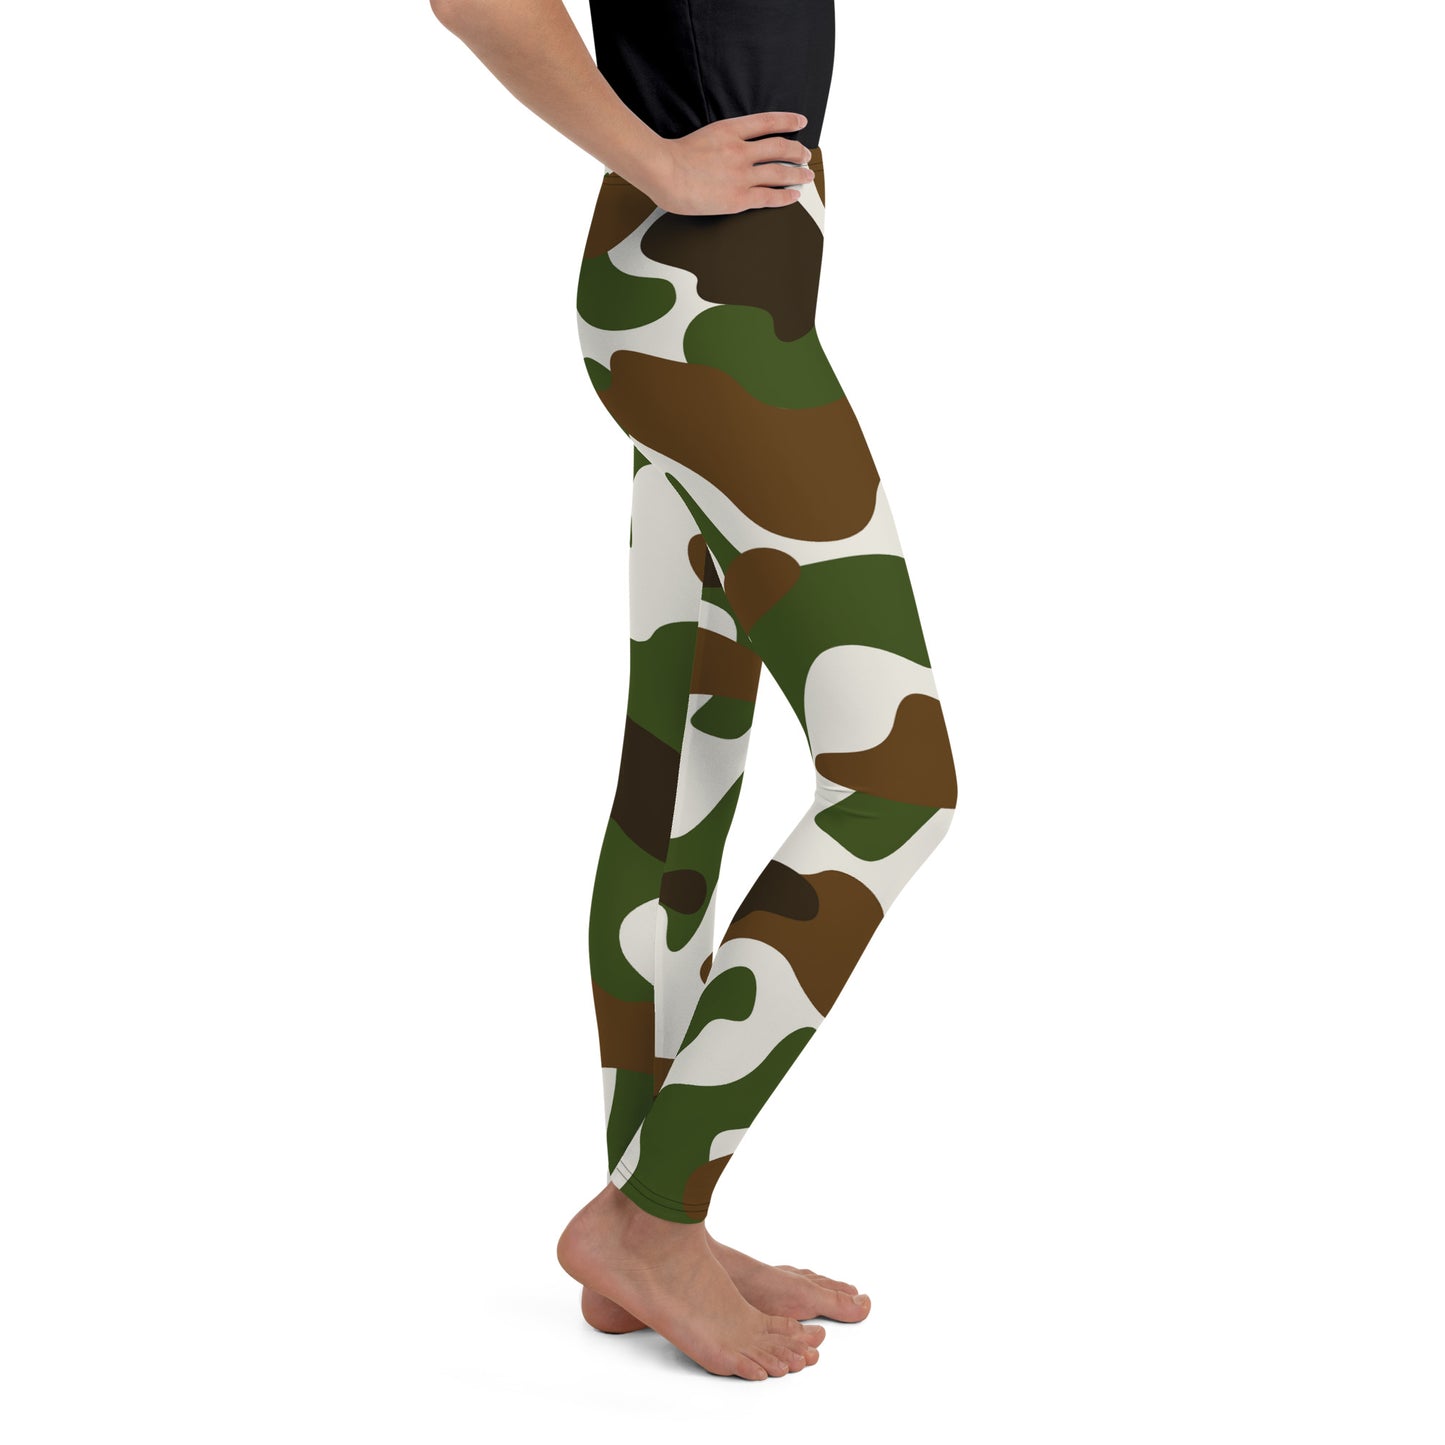 Youth Leggings - Green White & Brown Camouflage